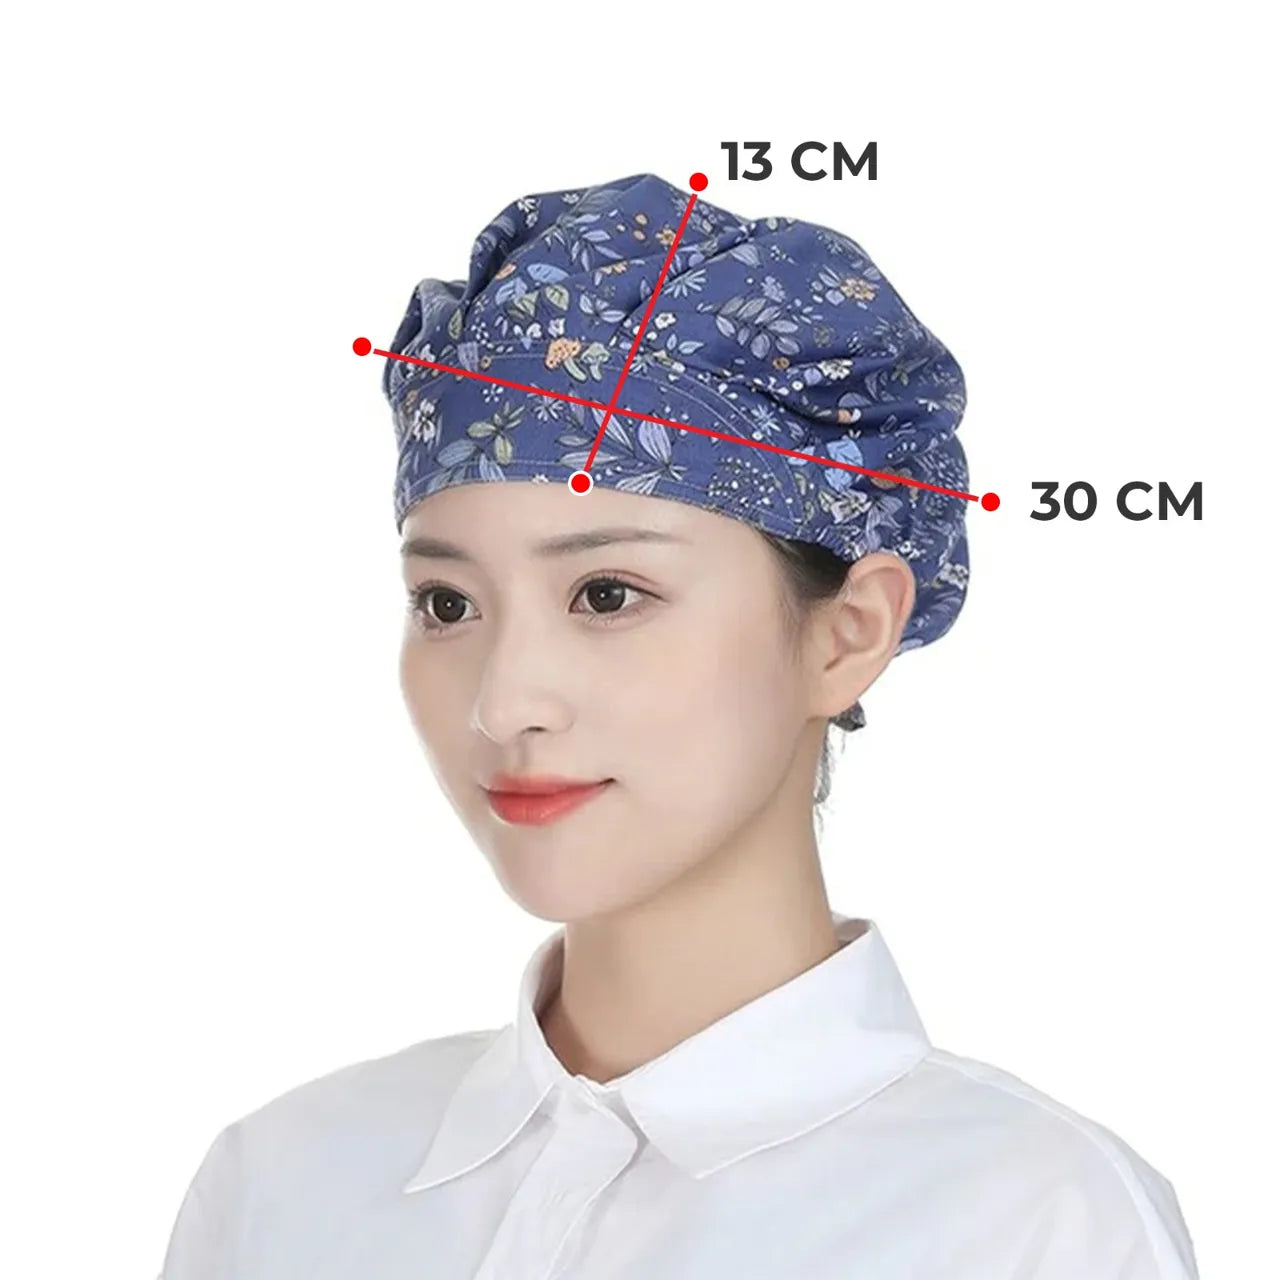 Kitchen Household Adjustable Cooking Chef Cap for Women with its size